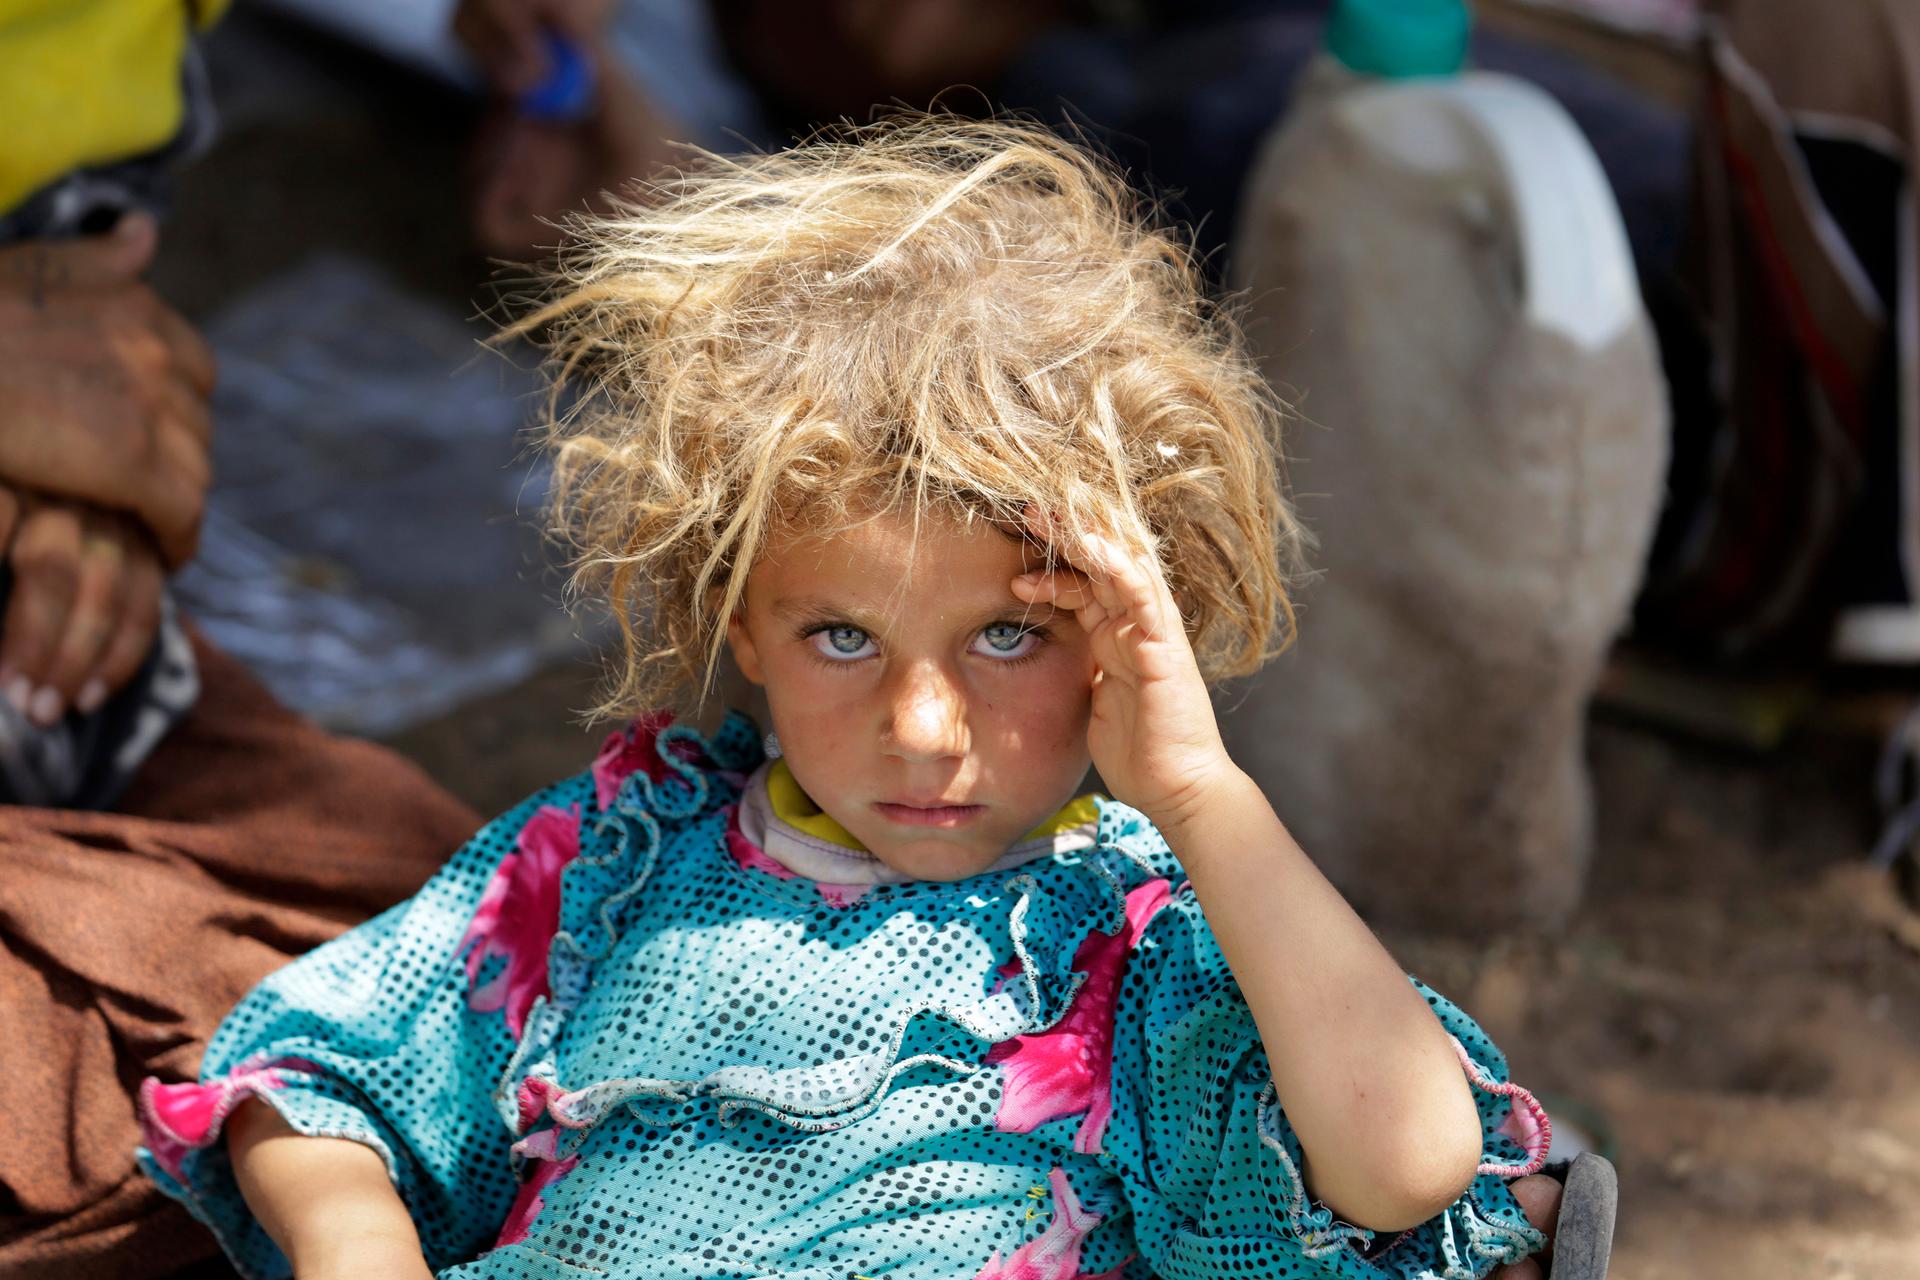 A girl from the minority Yazidi sect, fleeing the violence in the Iraqi town of Sinjar, rests at the Iraqi-Syrian border crossing in Fishkhabour, Dohuk province August 13, 2014.